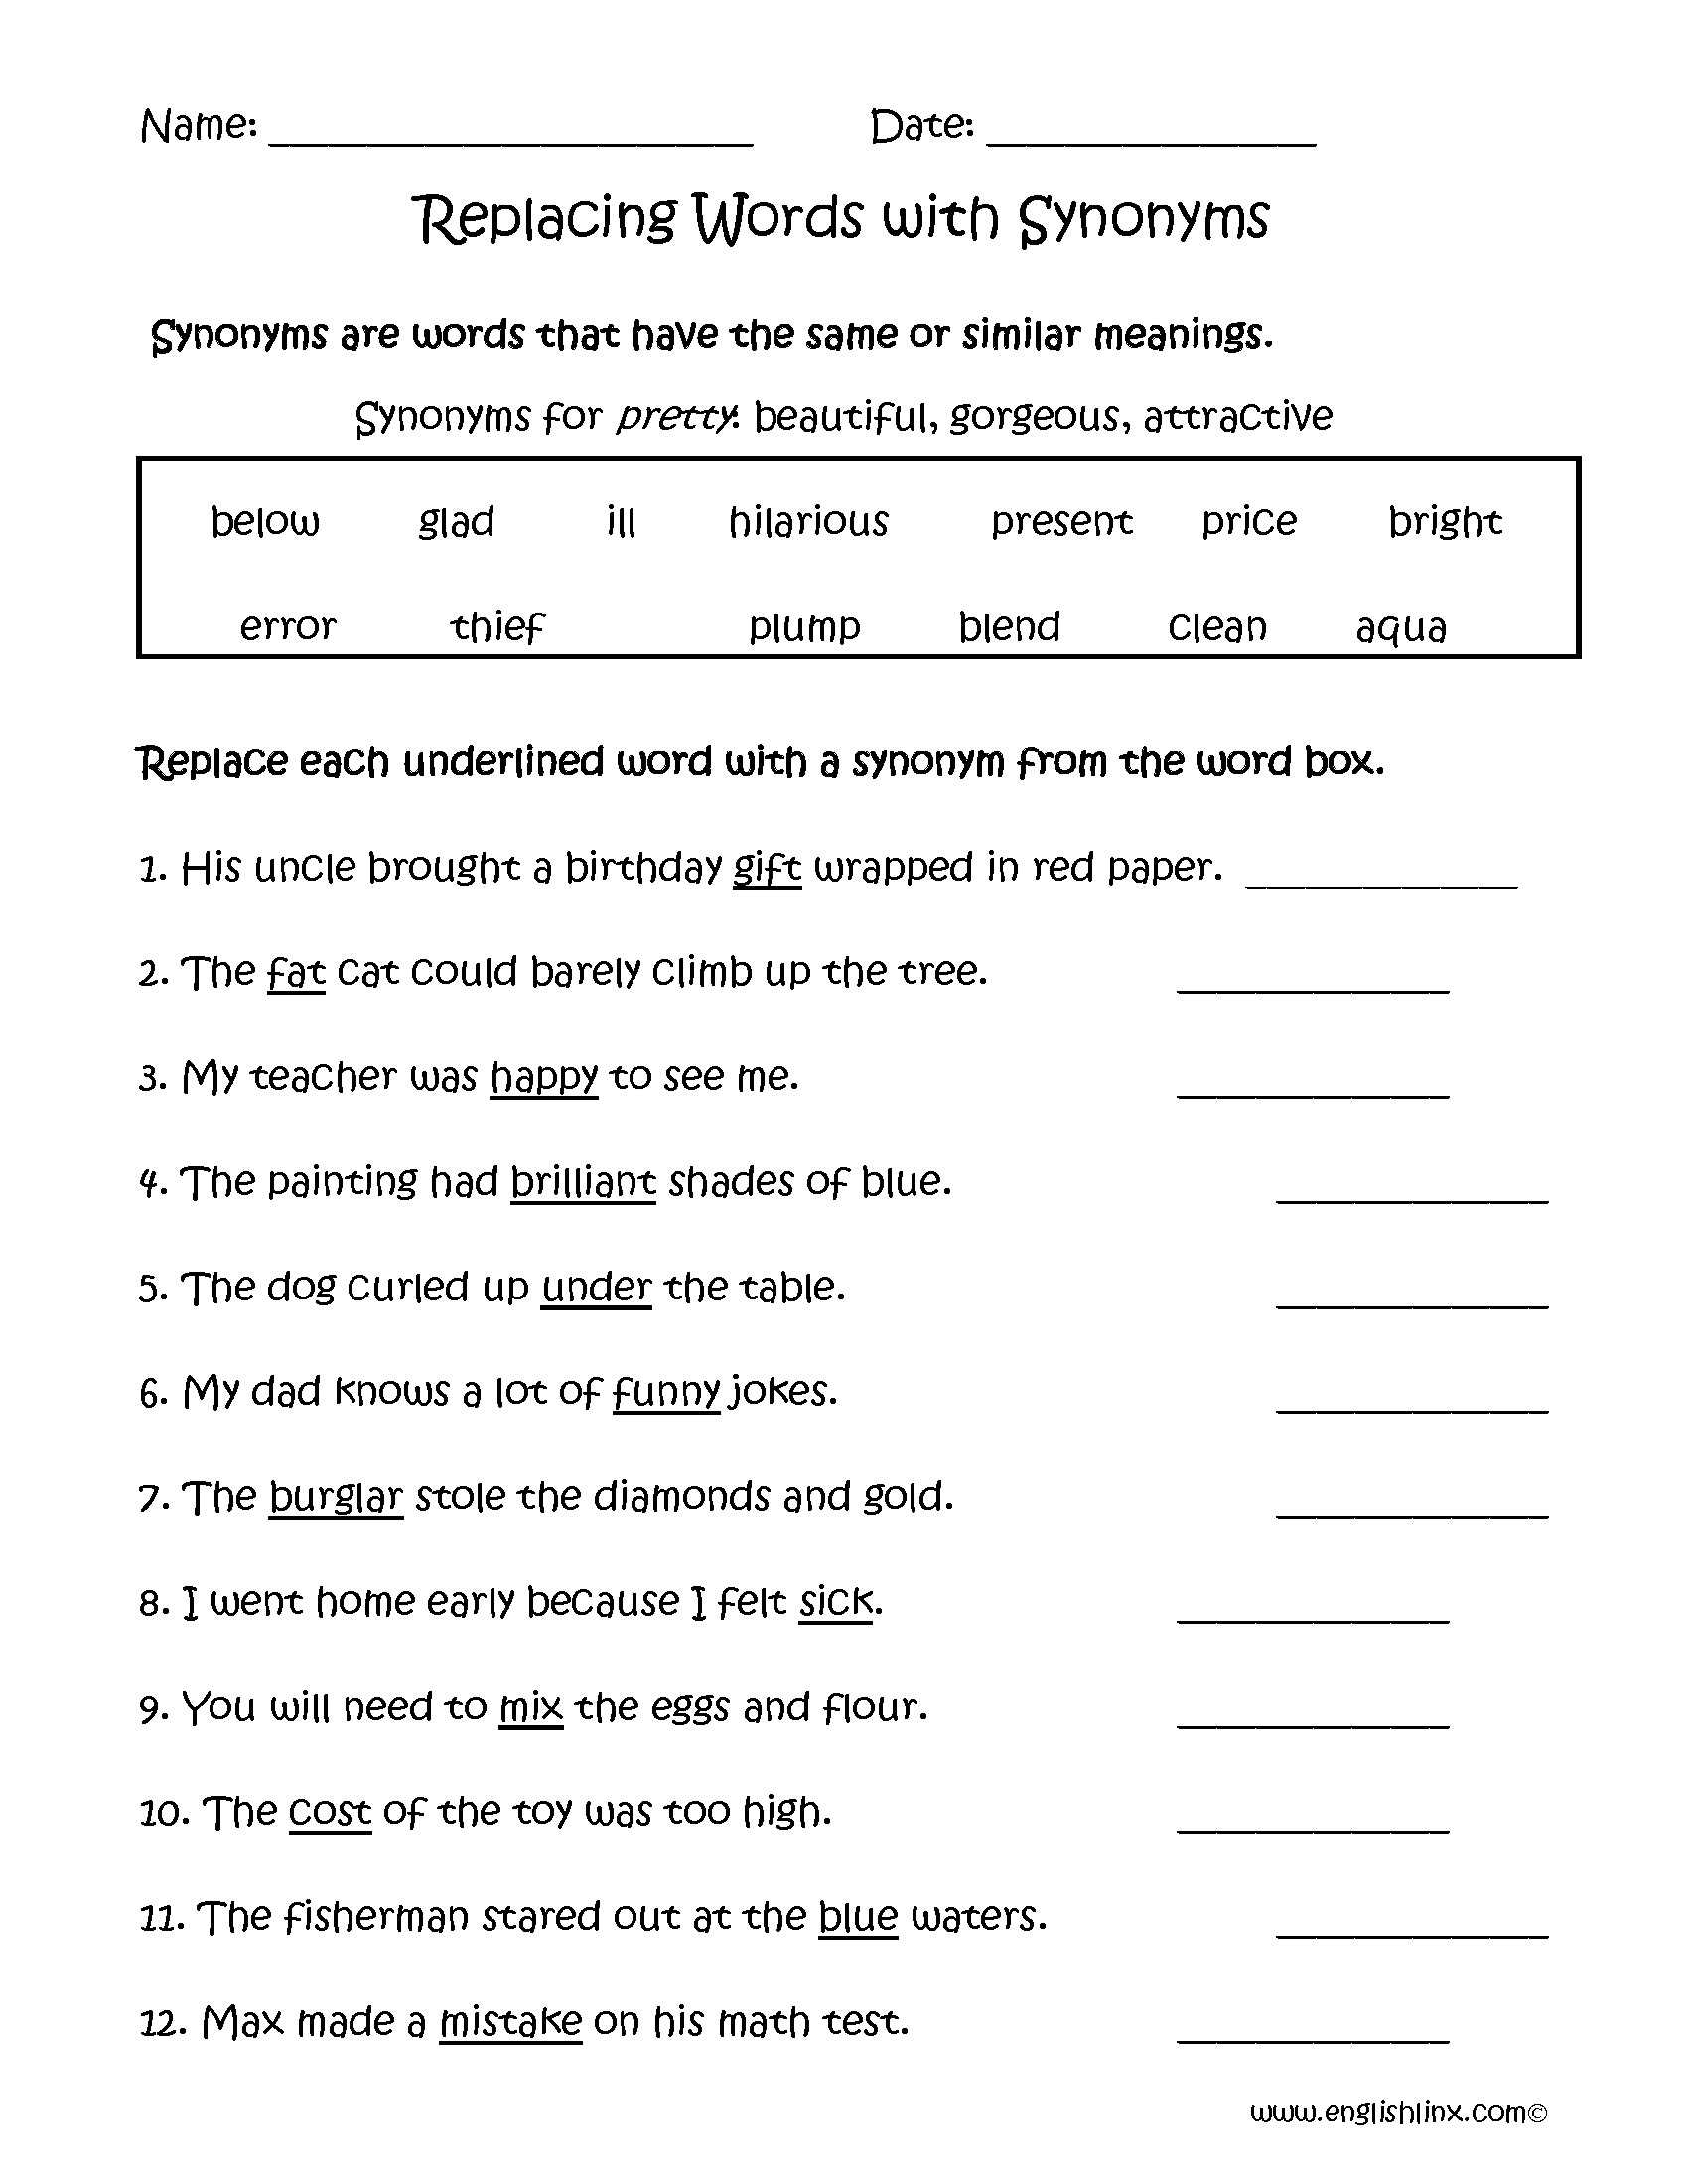 Fannie Mae Homestyle Renovation Maximum Mortgage Worksheet or 34 Awesome Prefix and Suffix Worksheets Pdf